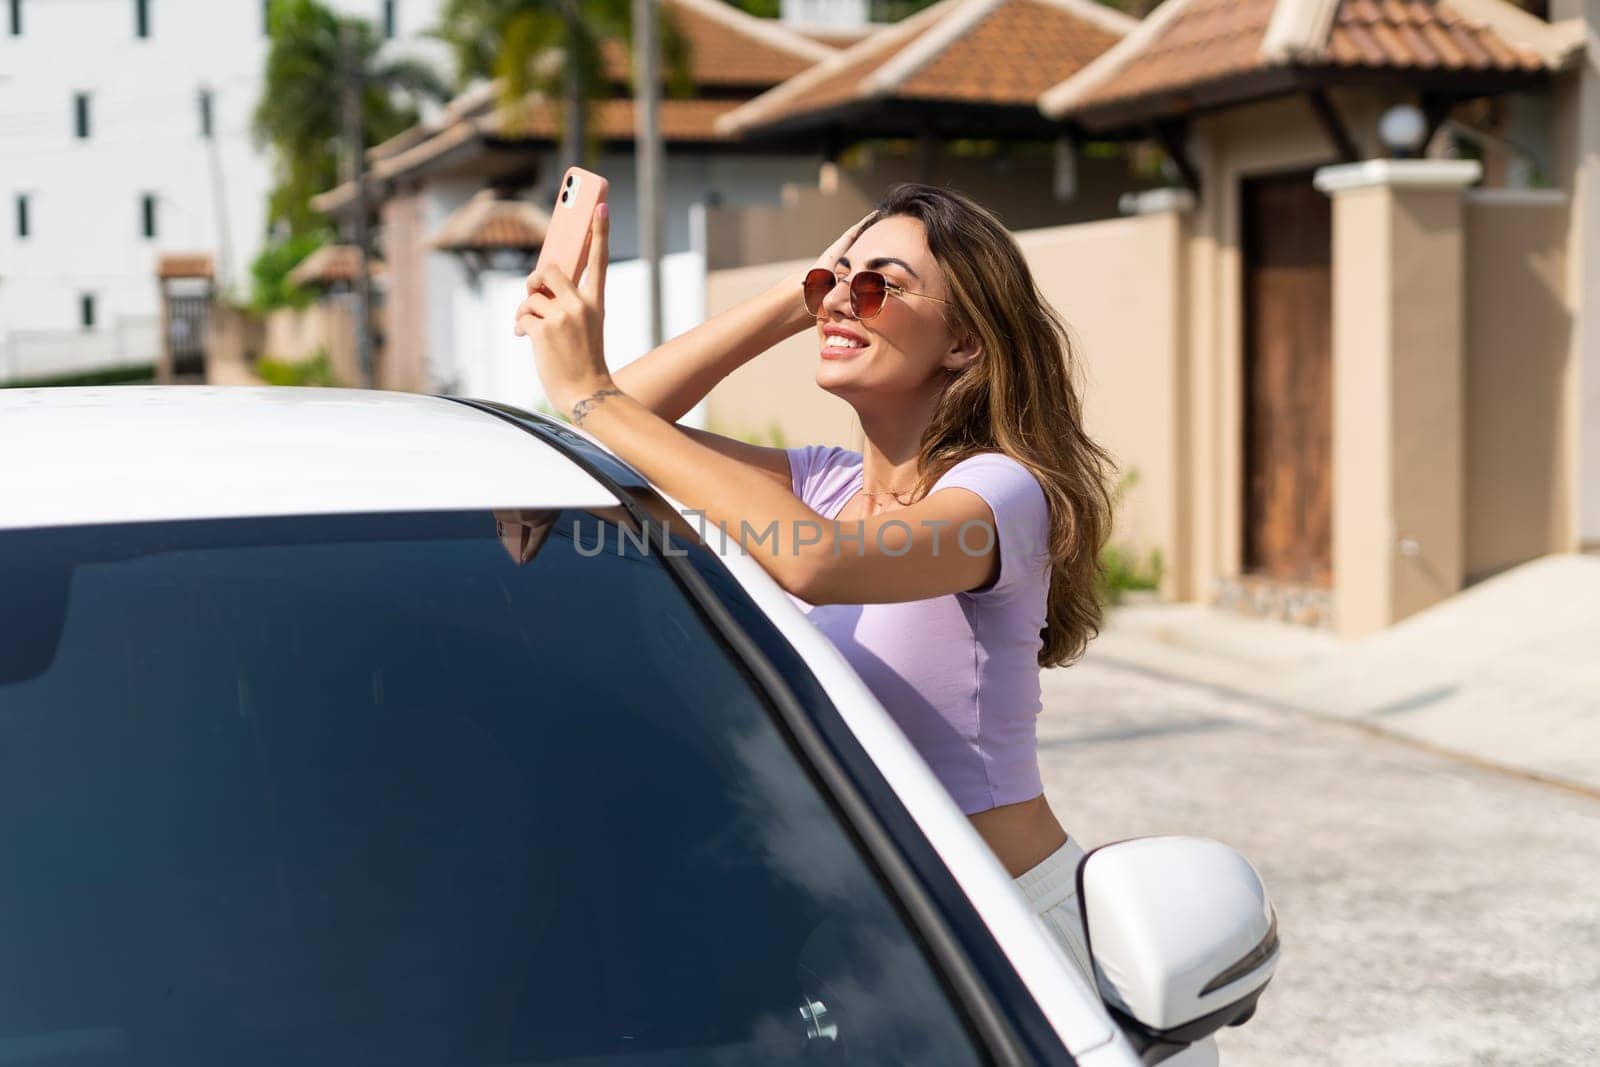 Successful smiling fit tanned attractive woman in casual wear is using her smart phone while standing near luxury modern car outdoors.